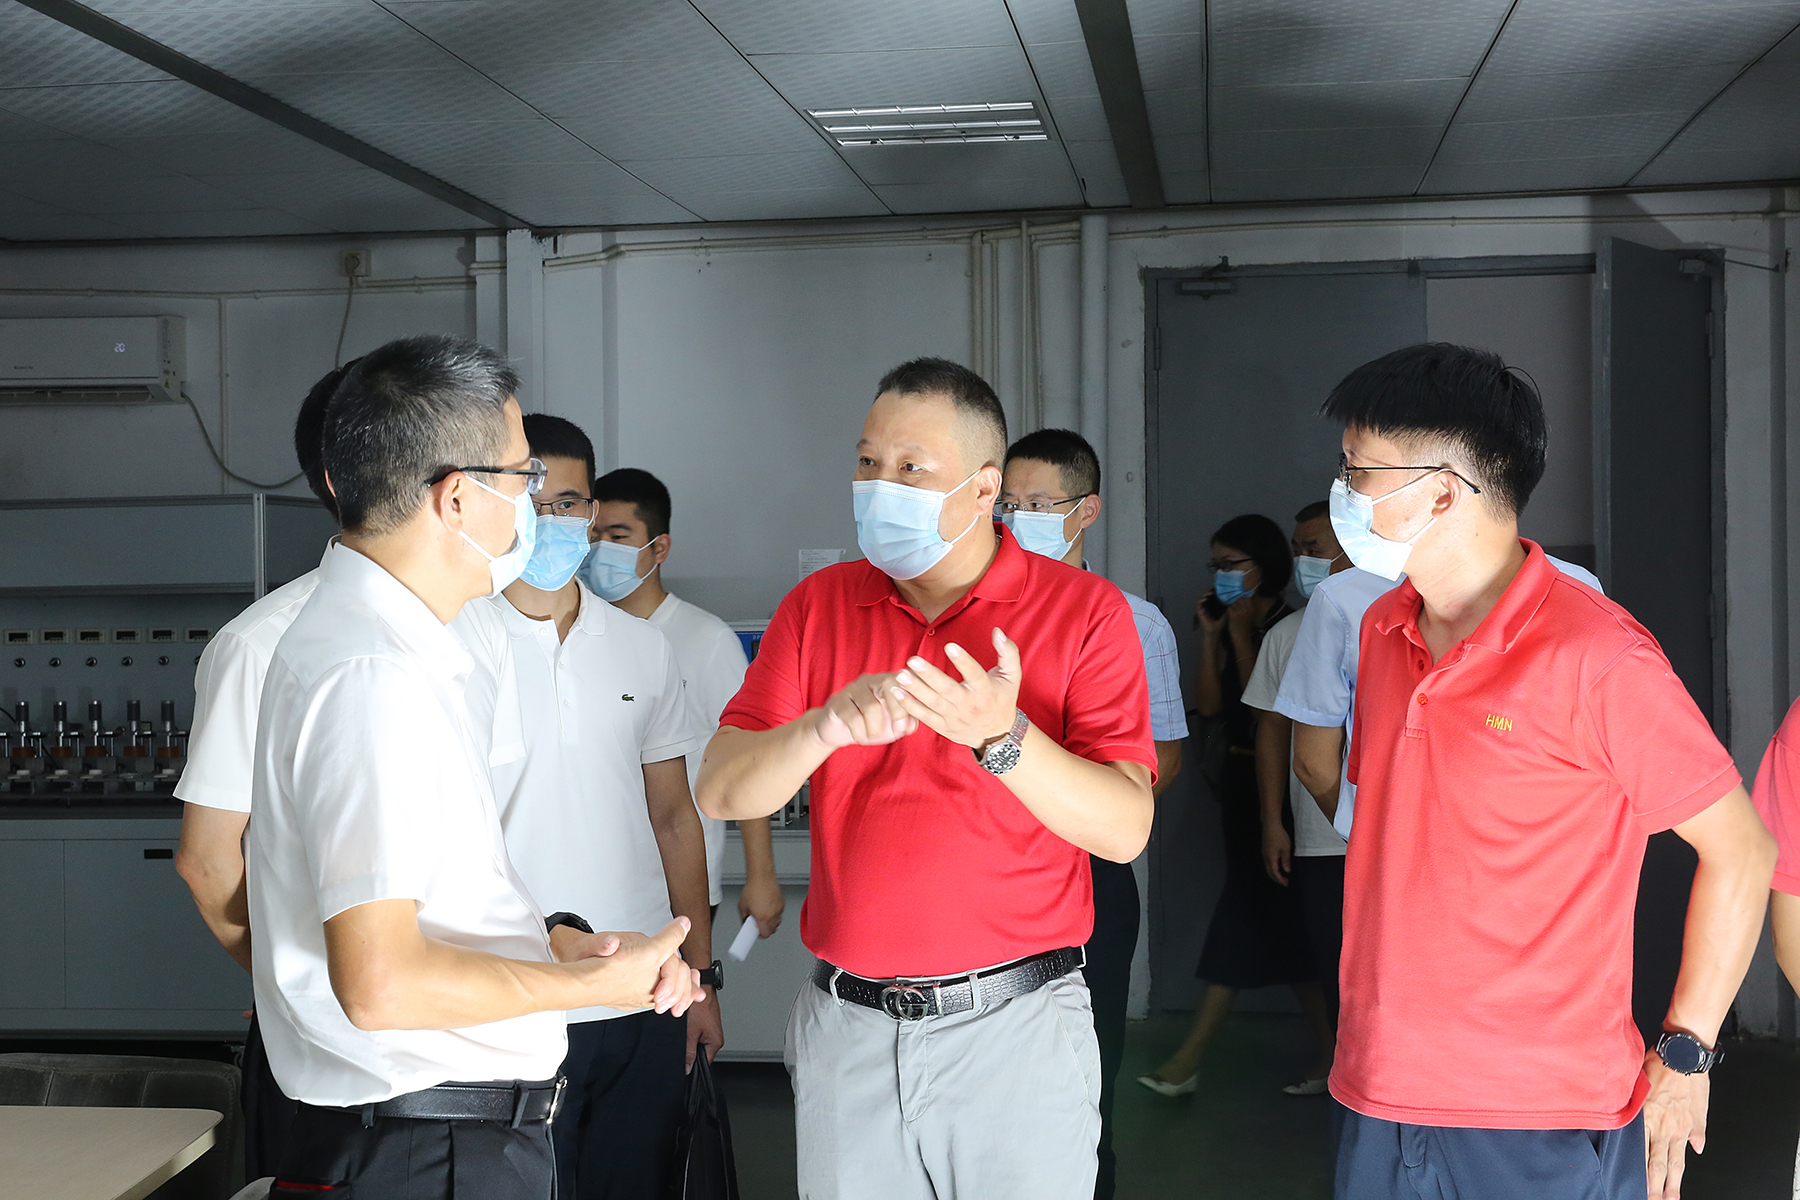 The mayor of Wenzhou visited Hermano Electric